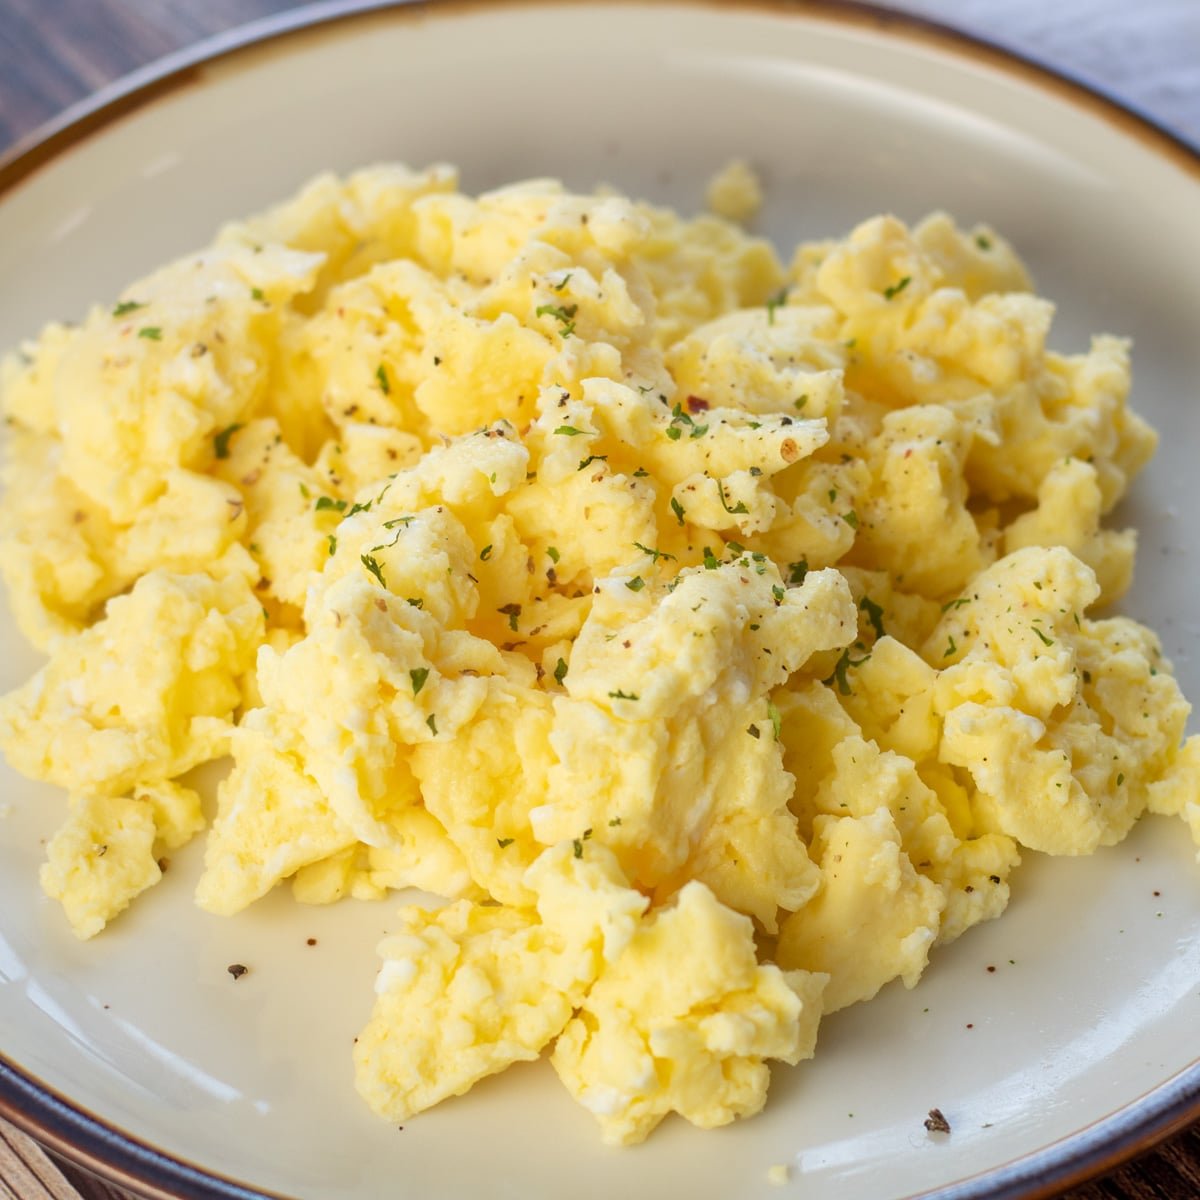 Square image of microwaved scrambled eggs on a plate.